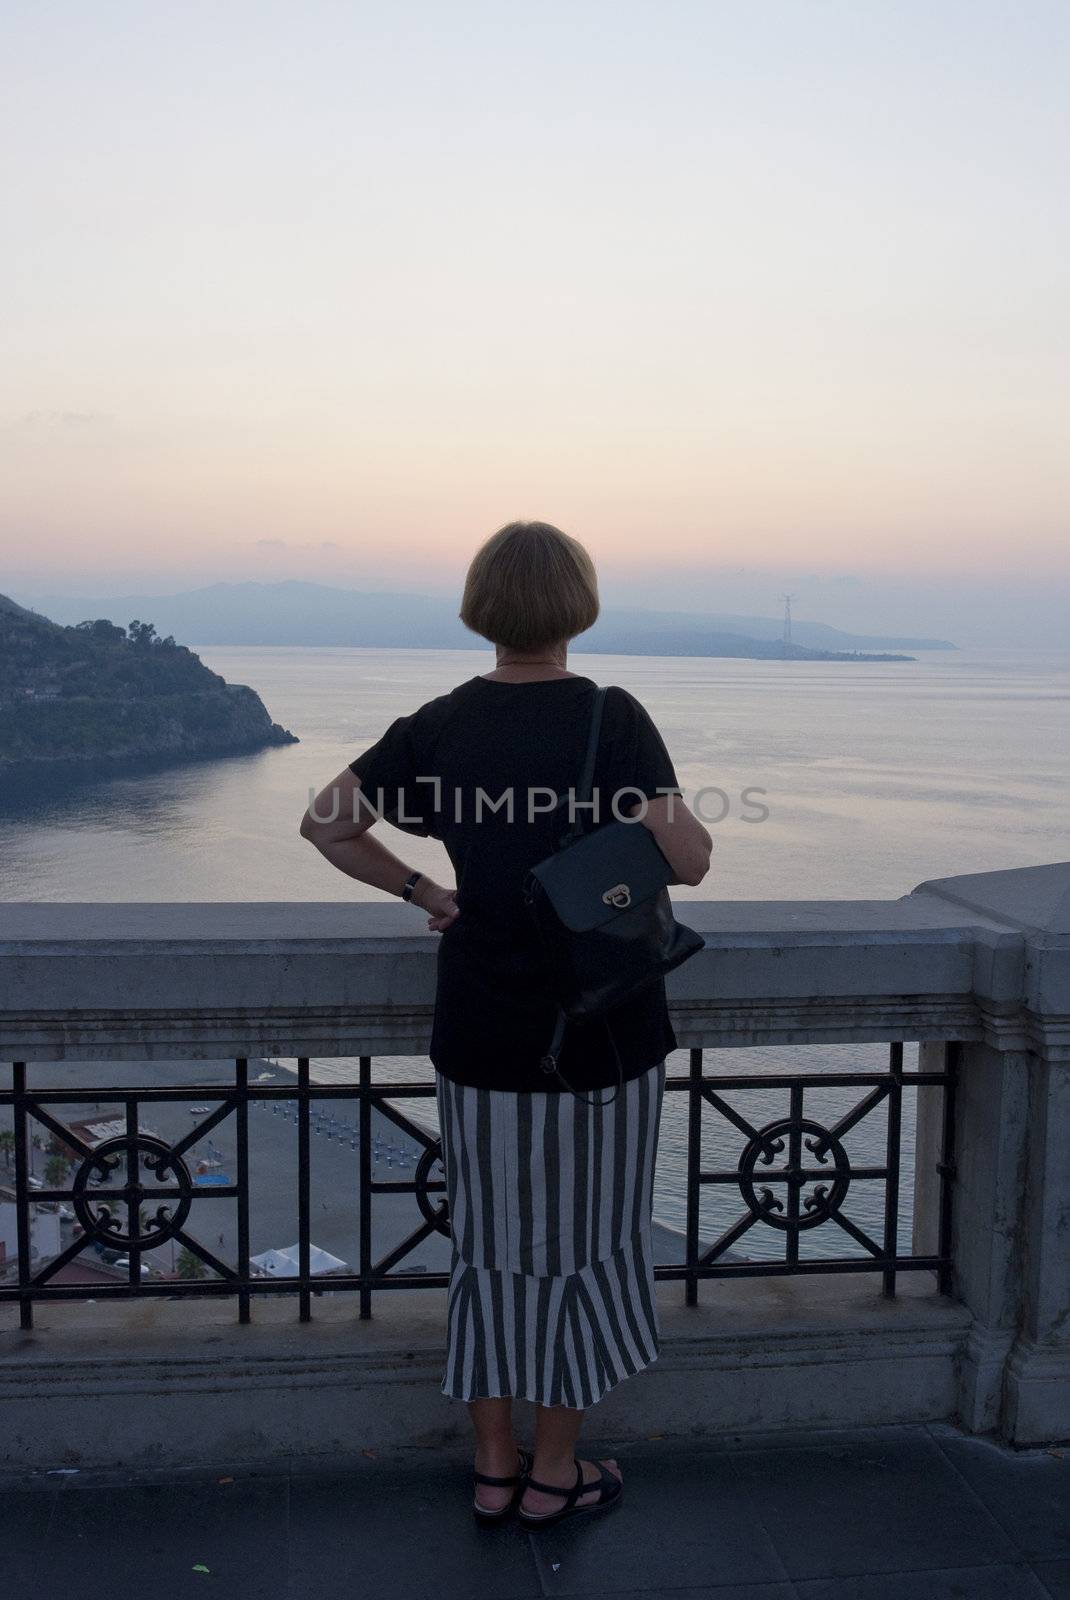 Senior female tourist at sunset in Scilla - the region of Calabria, Italy. She is looking at the strait of Messina with Sicily in the background.